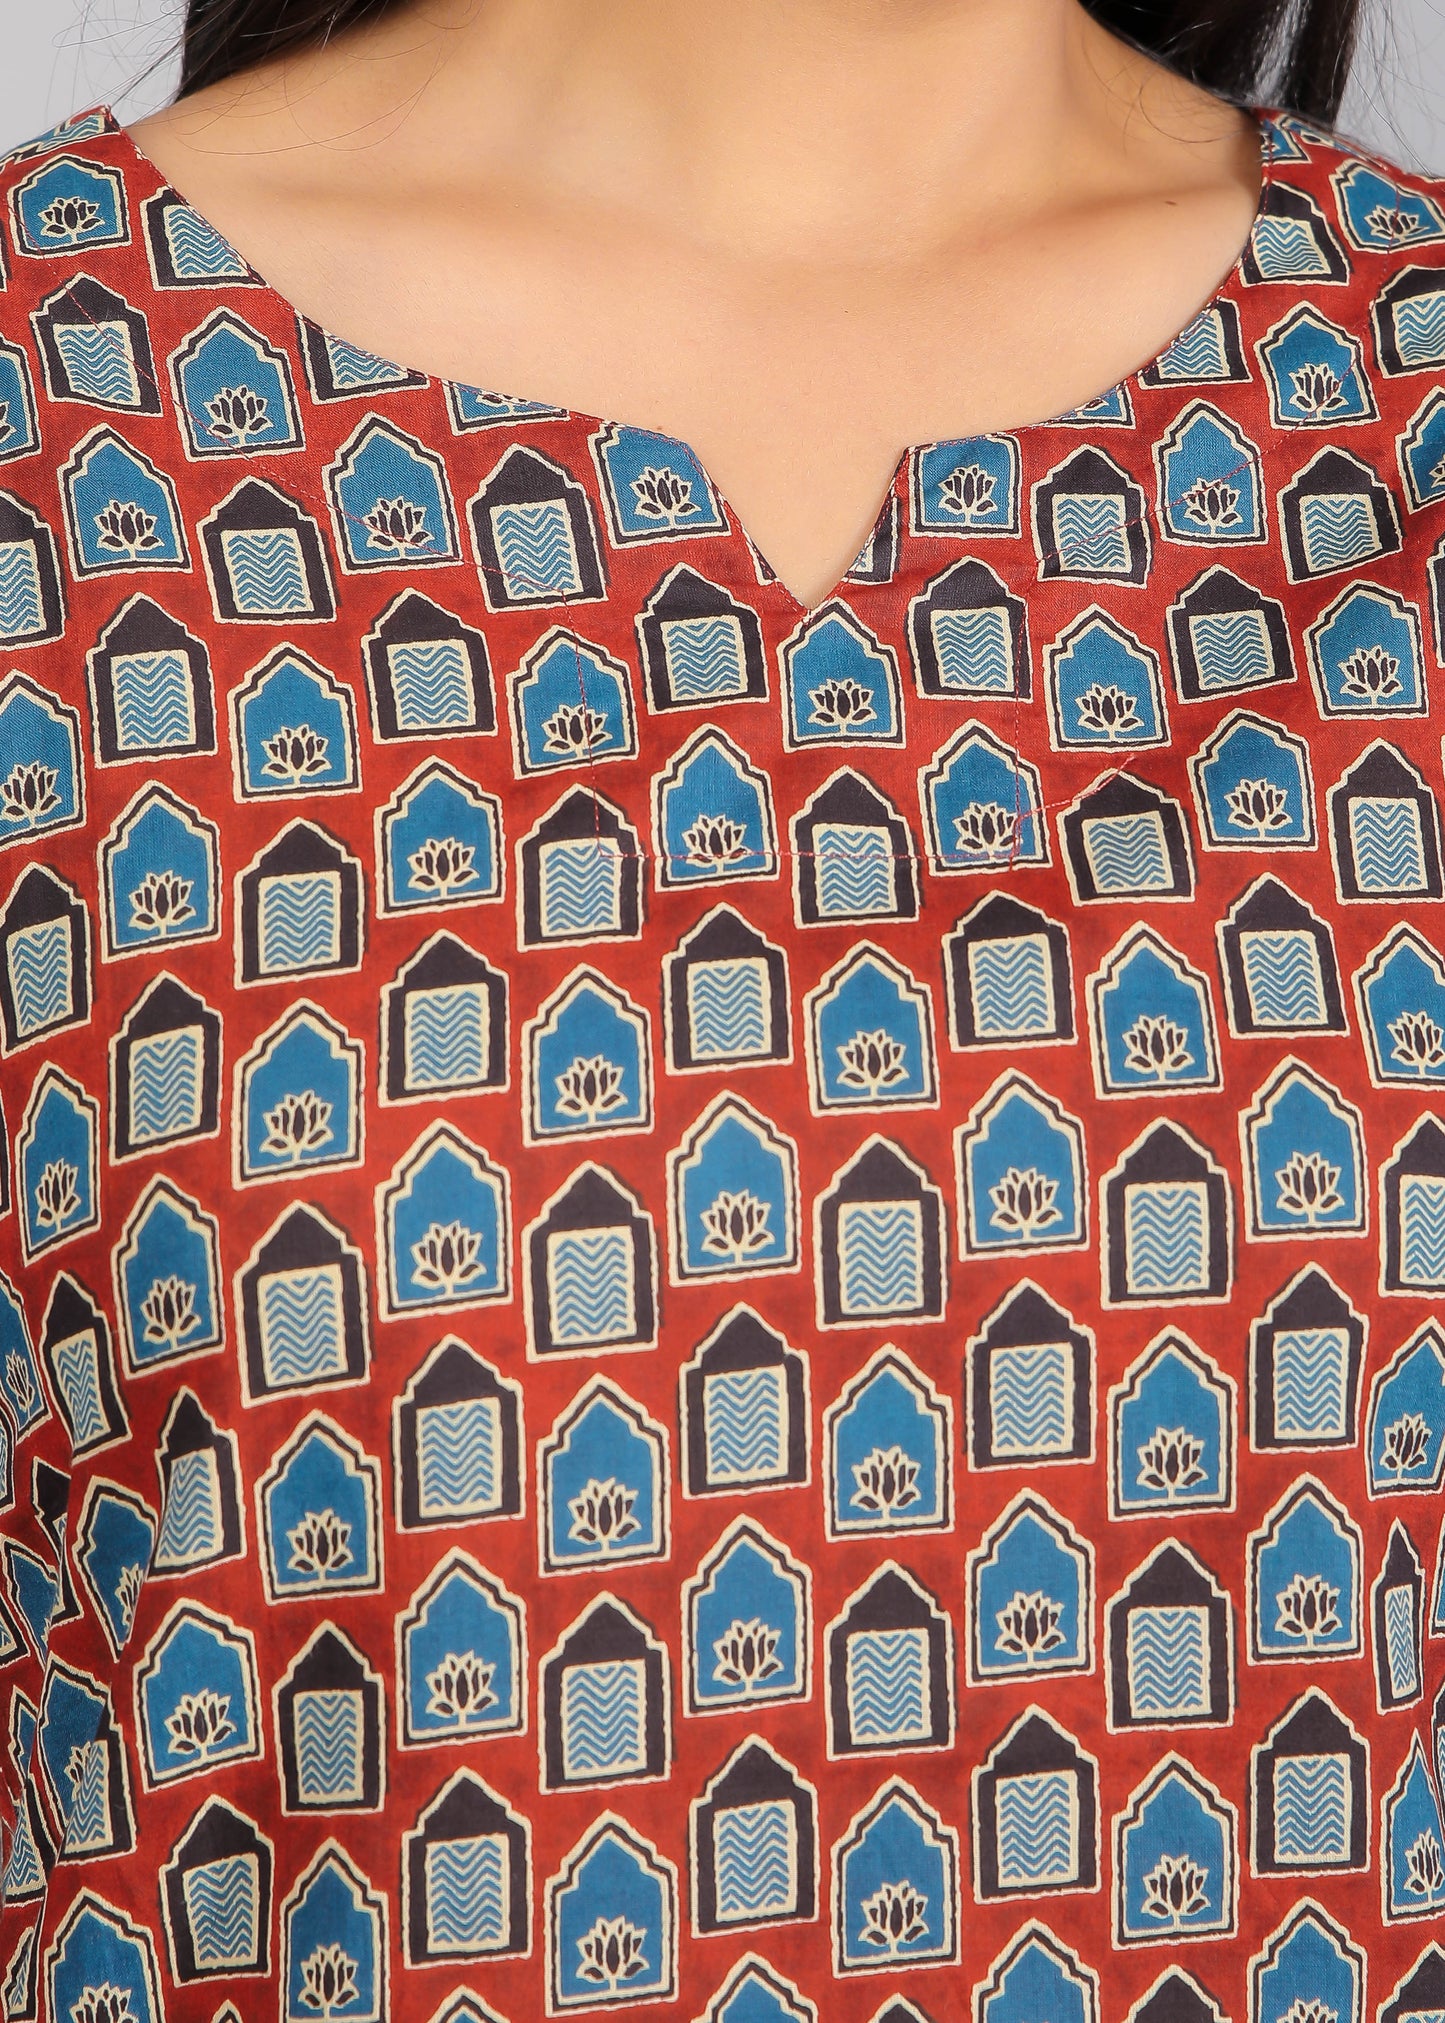 Blue Motifs on Red Cotton Lounge Set for Women